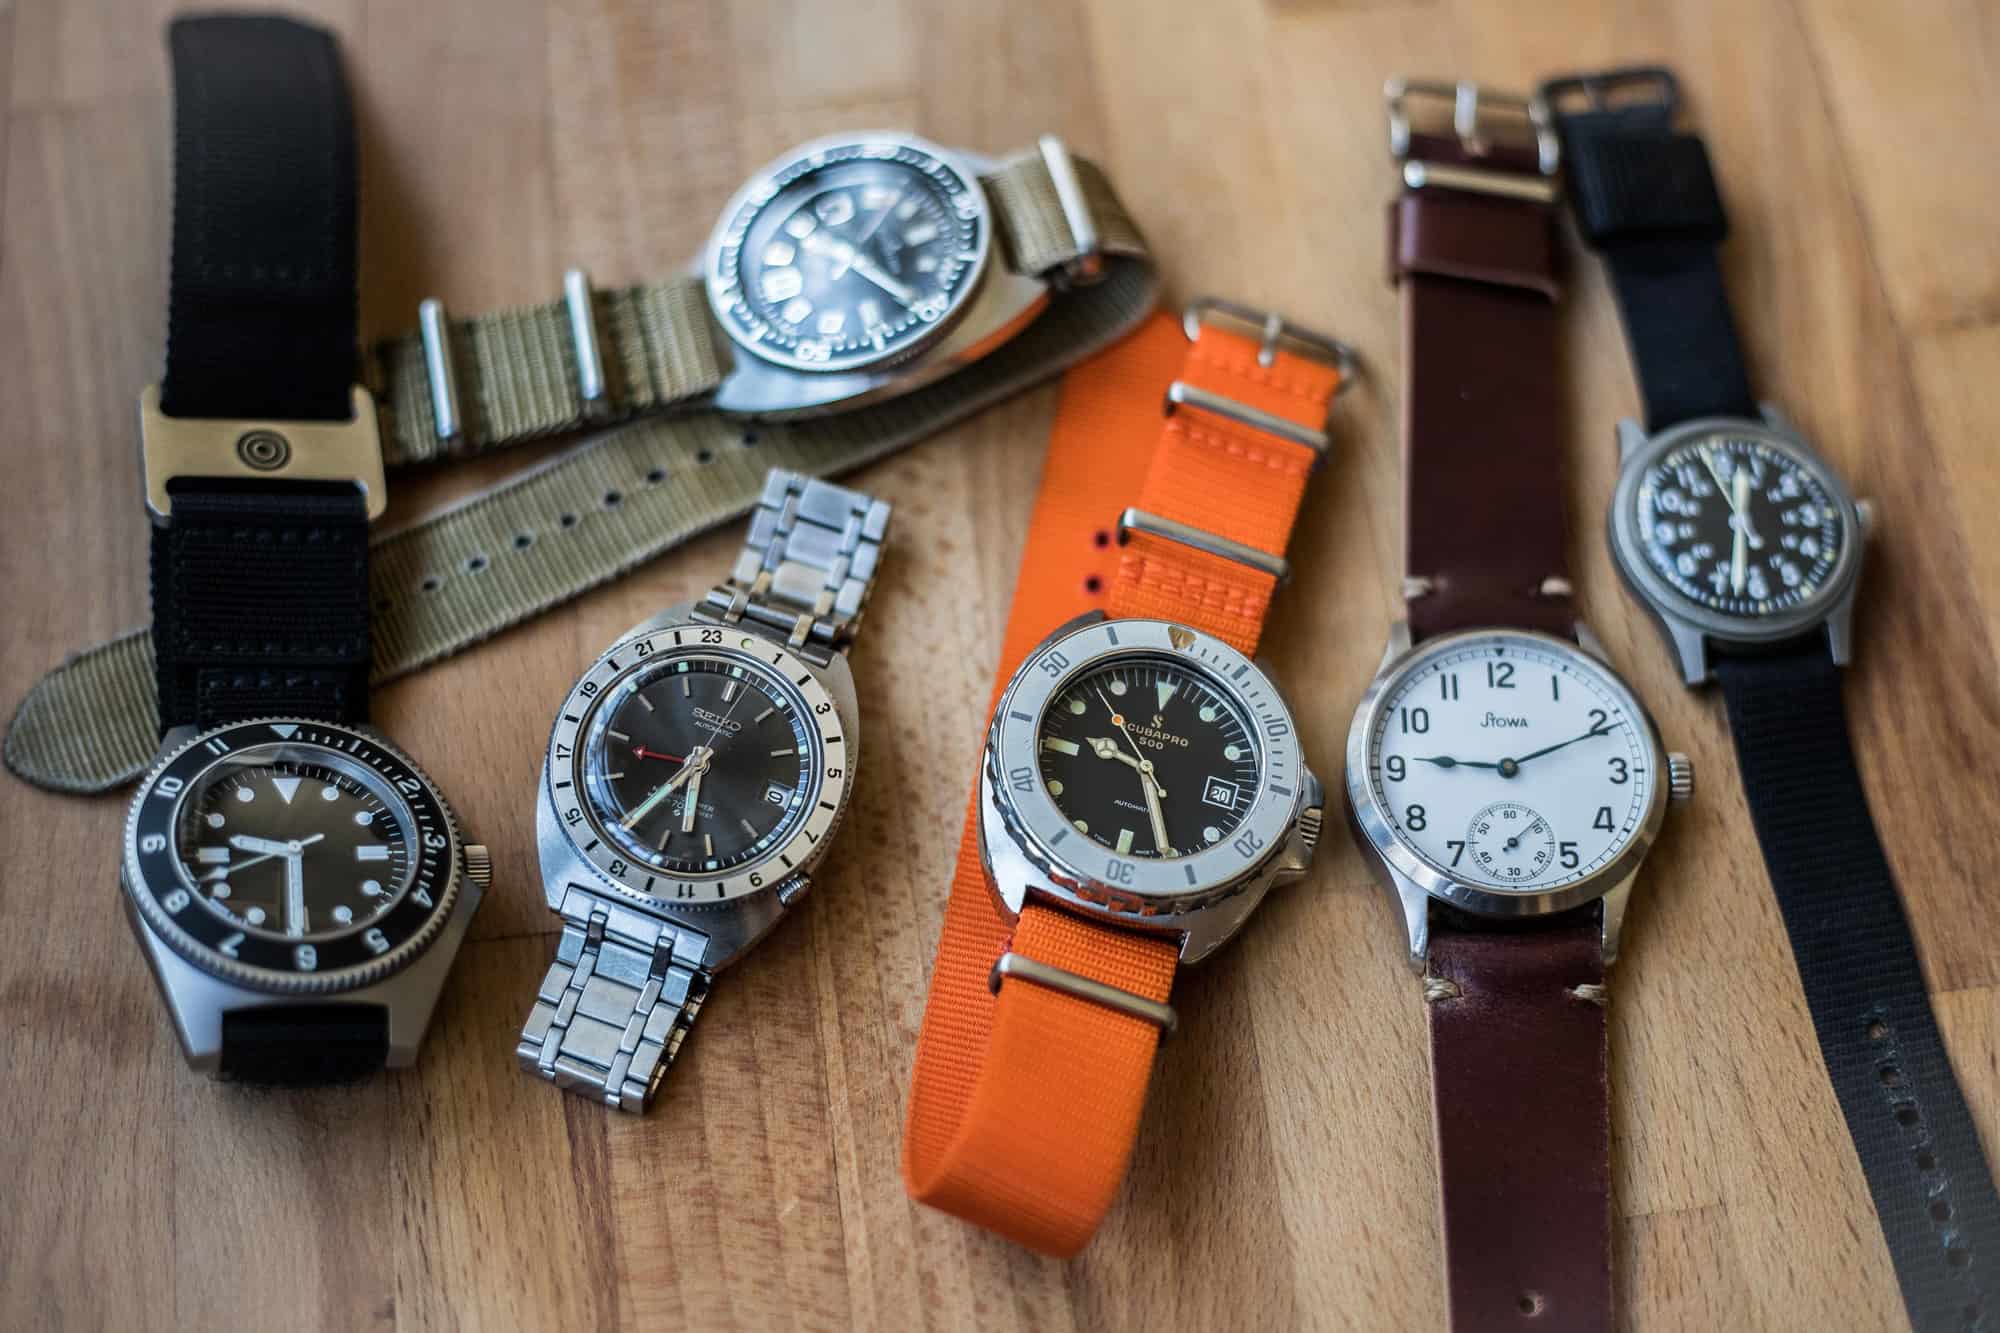 (VIDEO) My Watch: Collecting Seiko, Military, and Vintage Tool Watches with Jon Gaffney